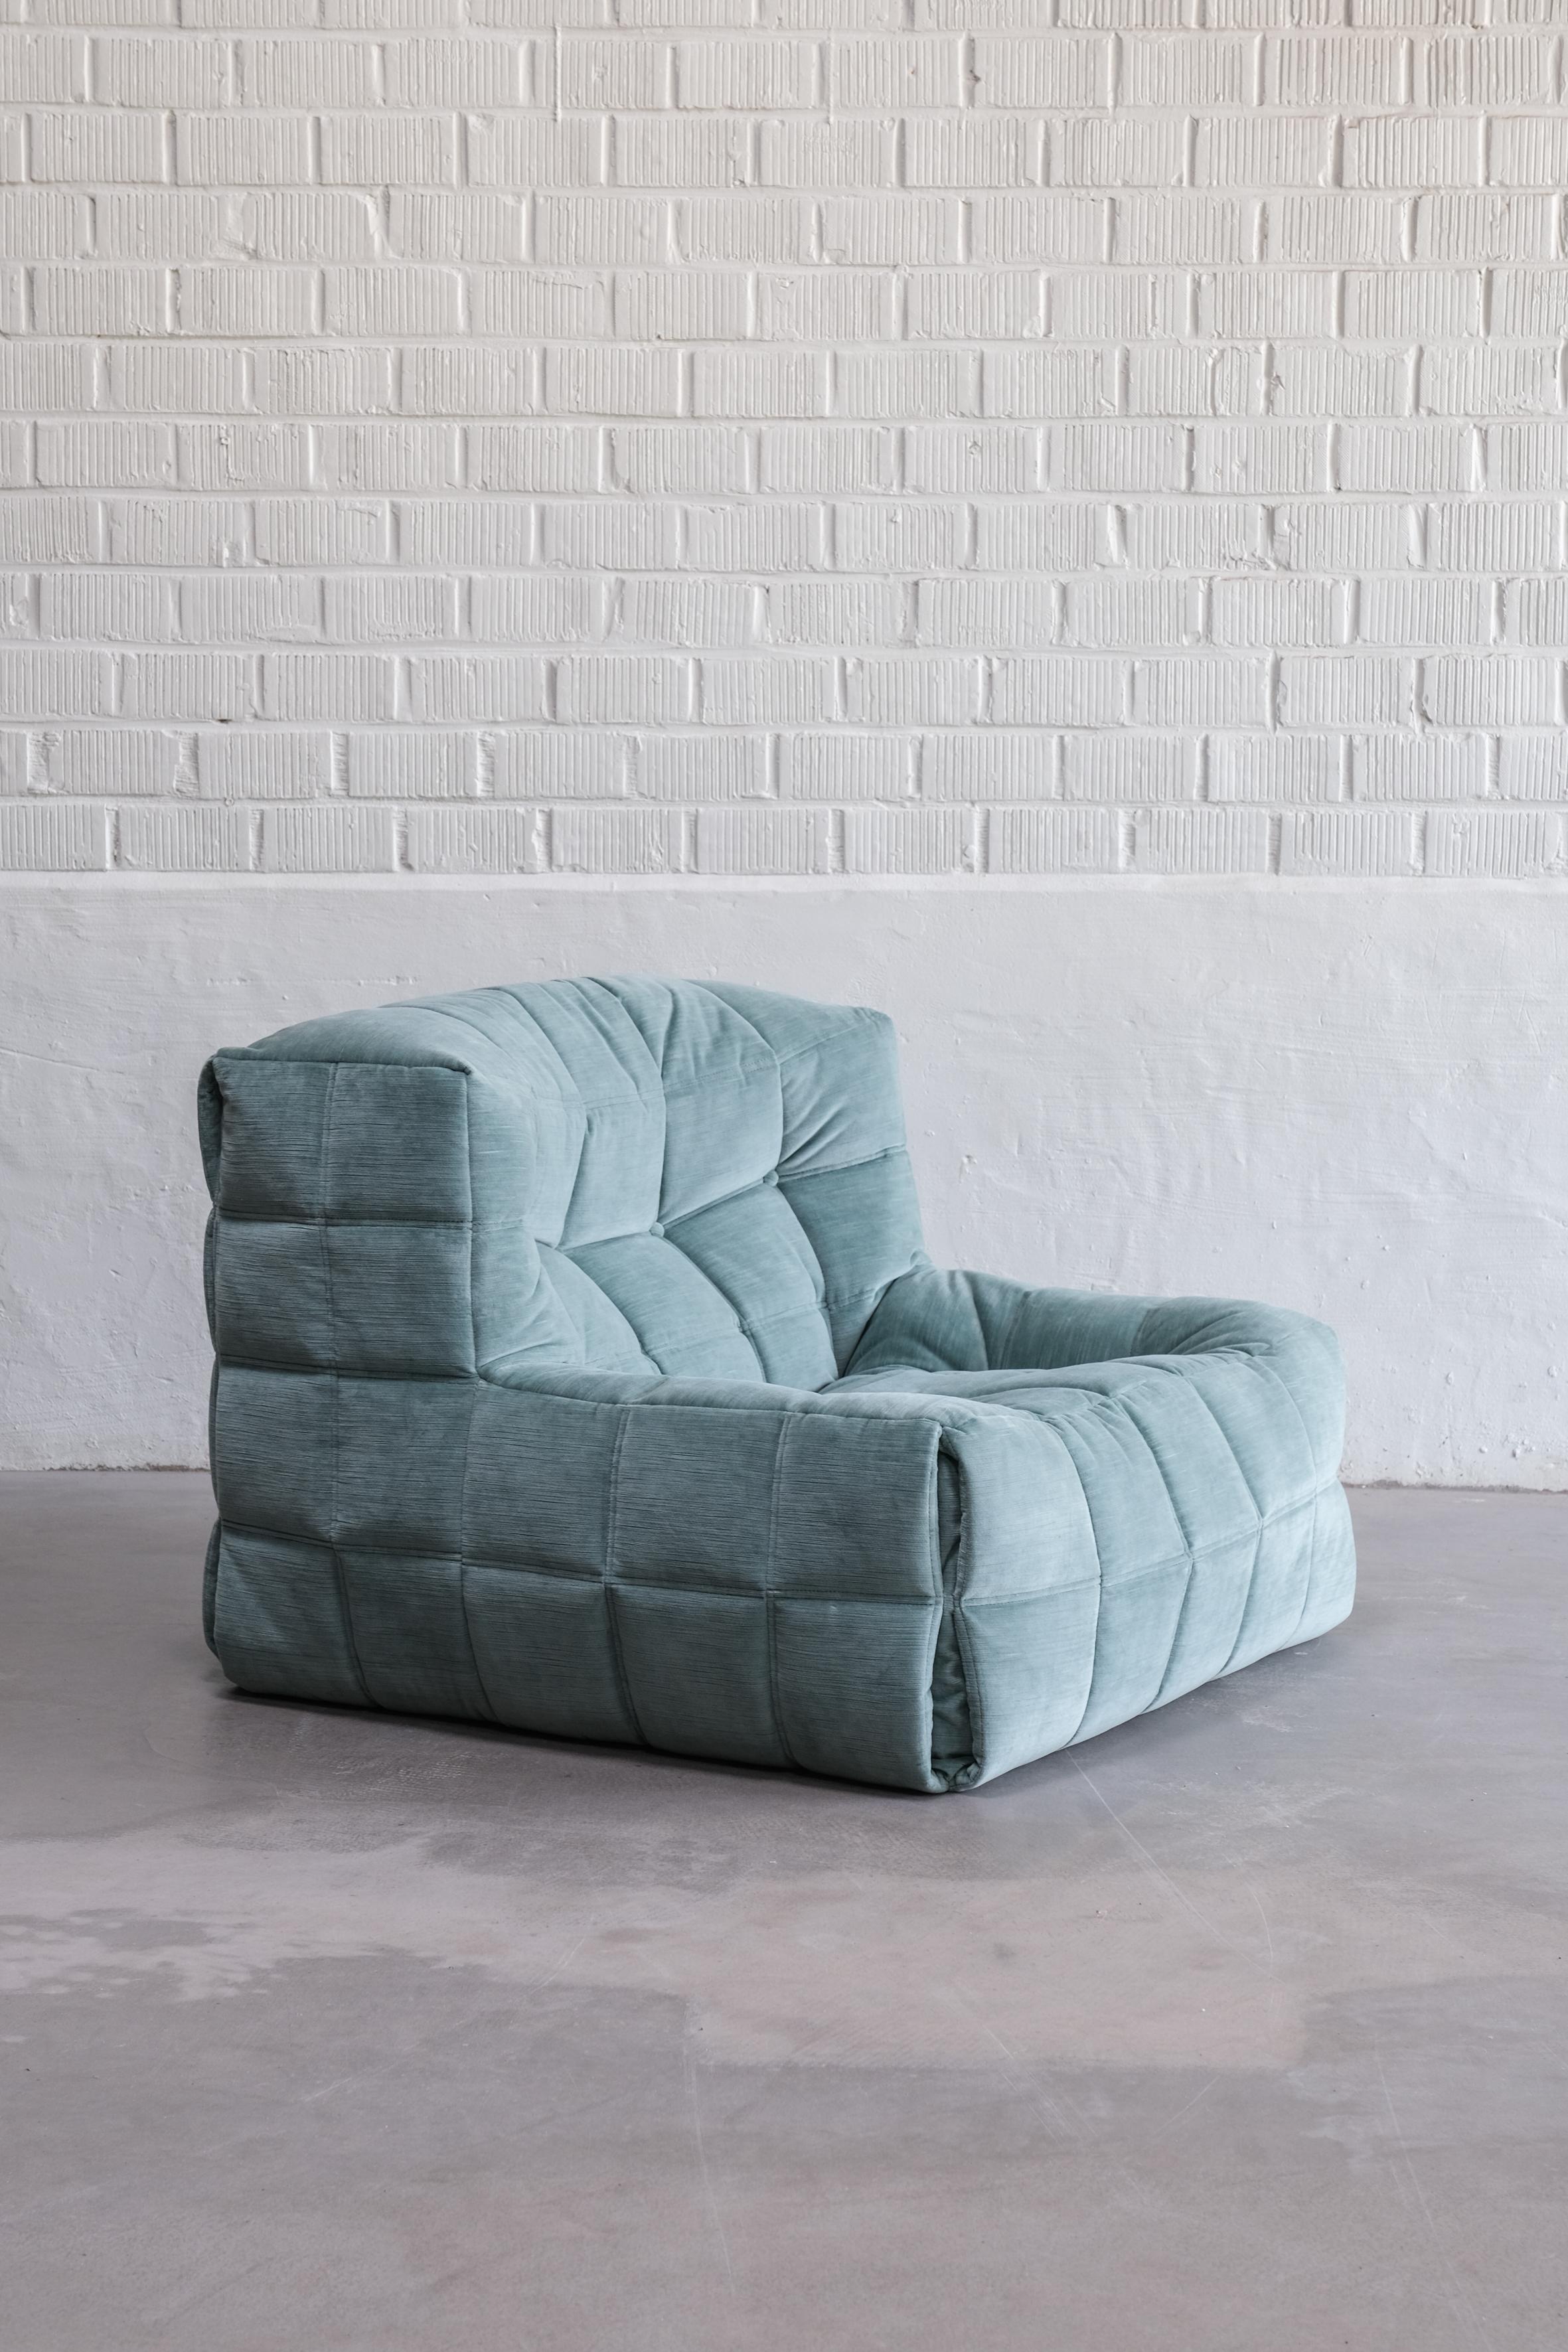 Kashima one seater sofa designed by Michel Ducaroy for Ligne Roset also known from togo and many more design he created.